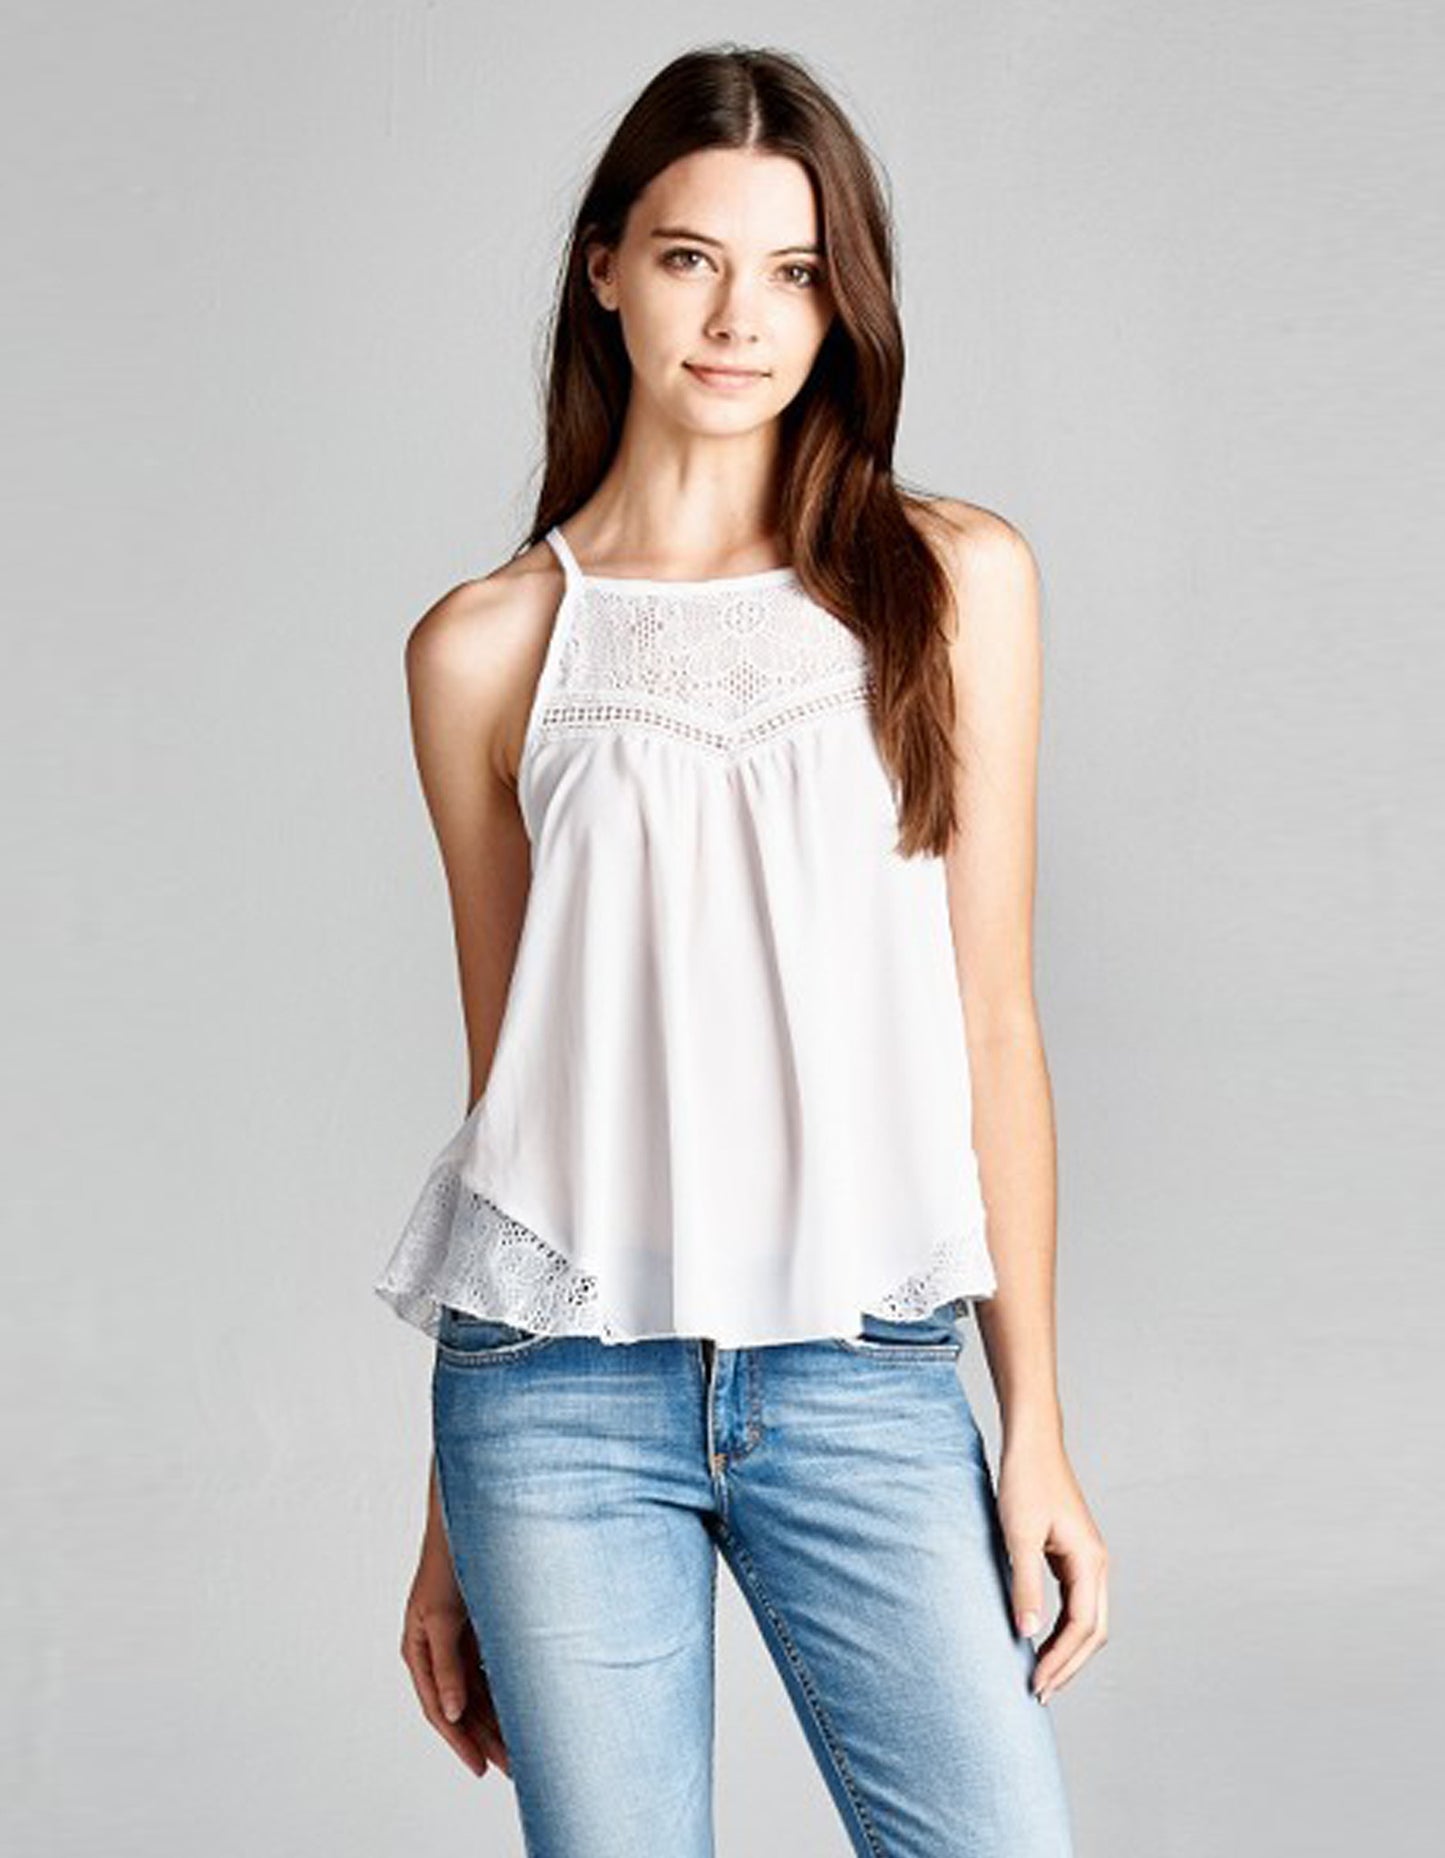 Tank Top White With Lace Neckline